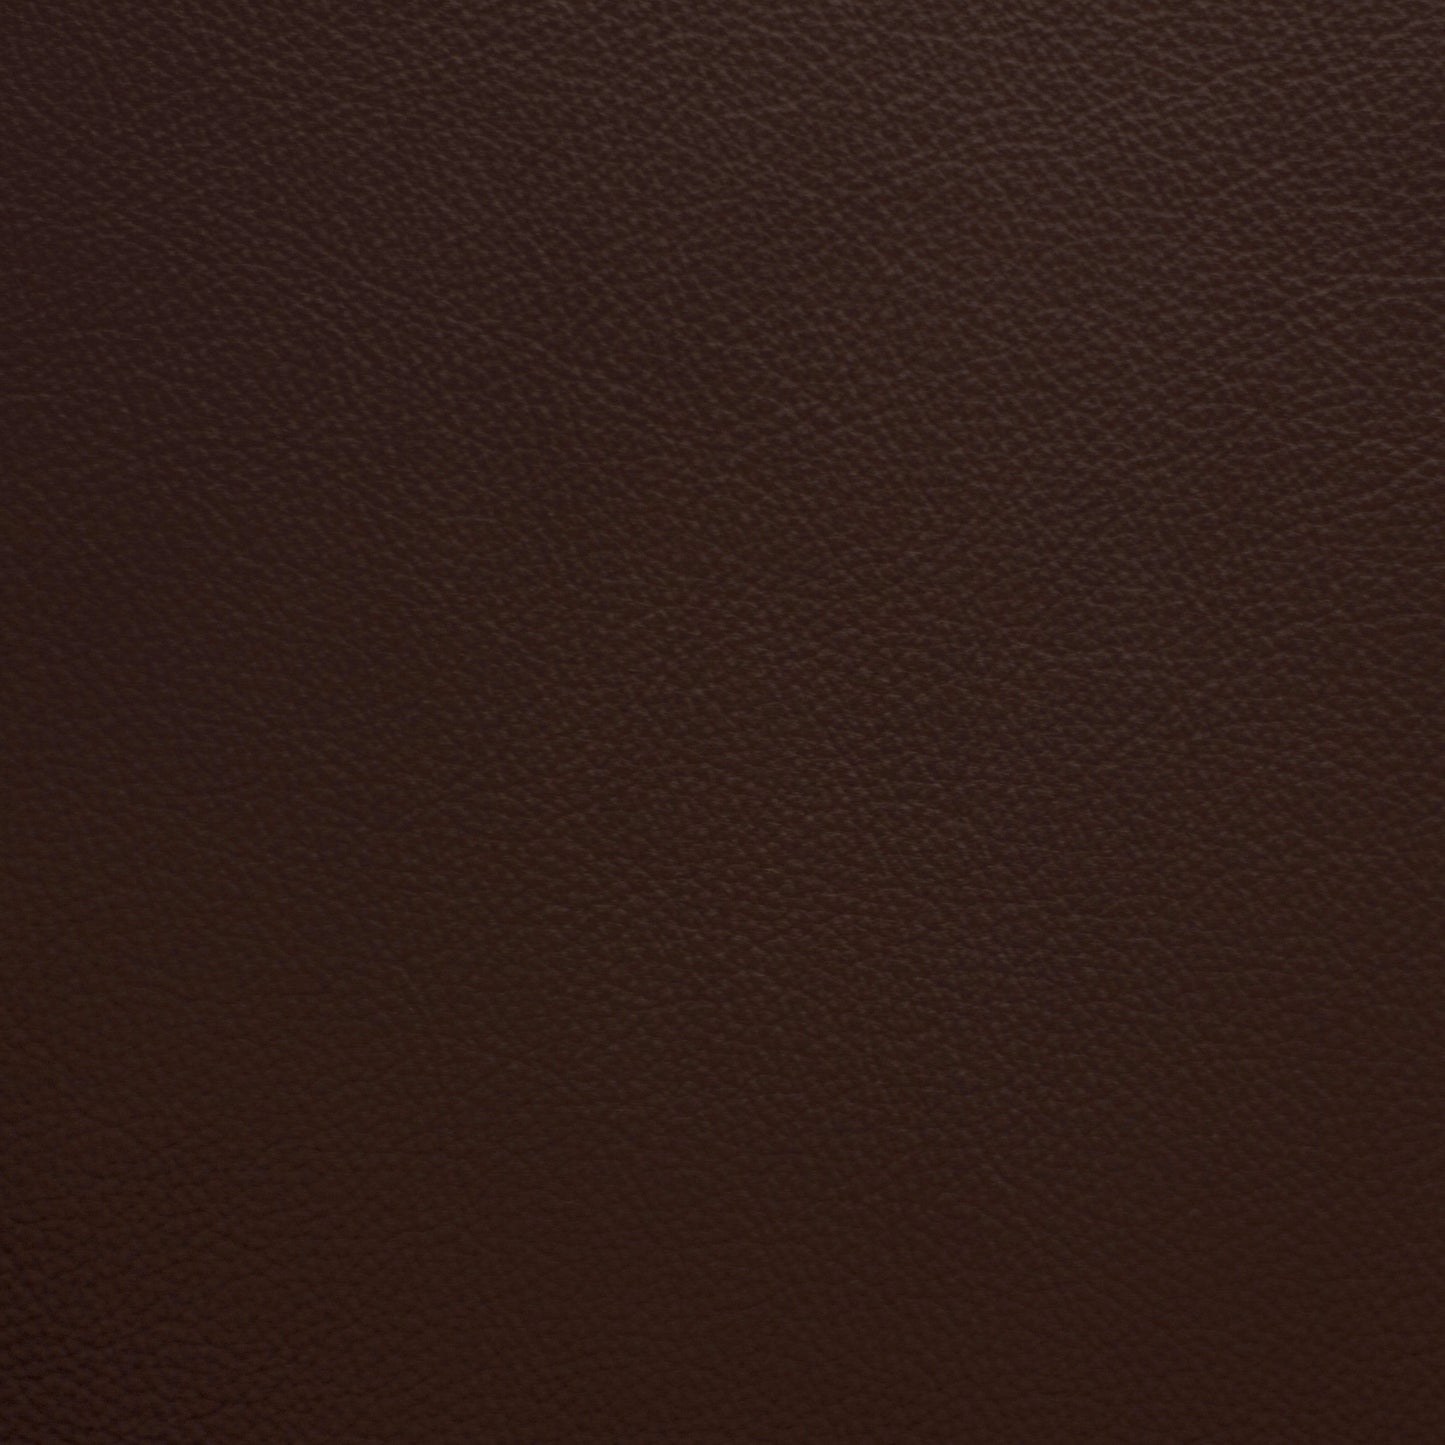 Diva, Fever, Iconic® Antimicrobial & Cleanable, Hospitality Leather Hide